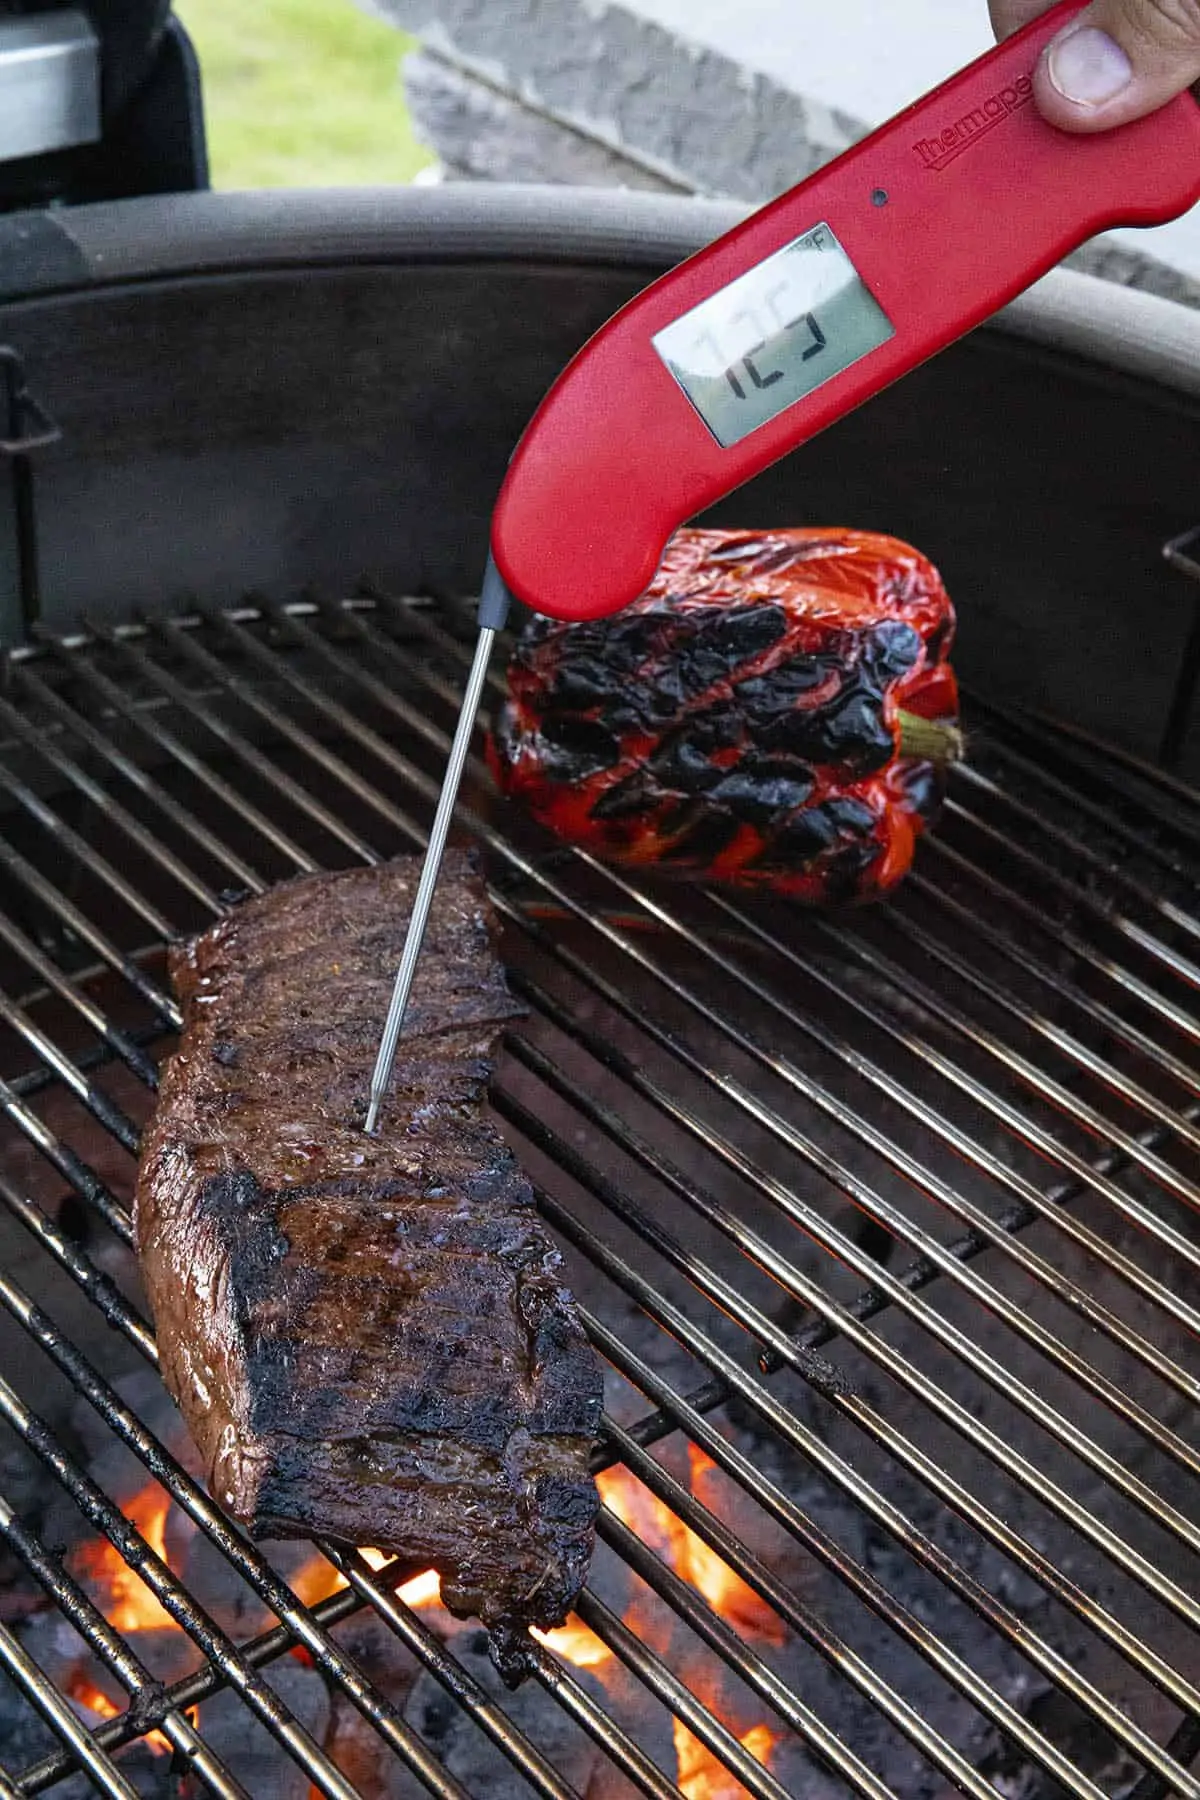 Checking the internal temperature of the flank steak on the grill with a meat thermometer